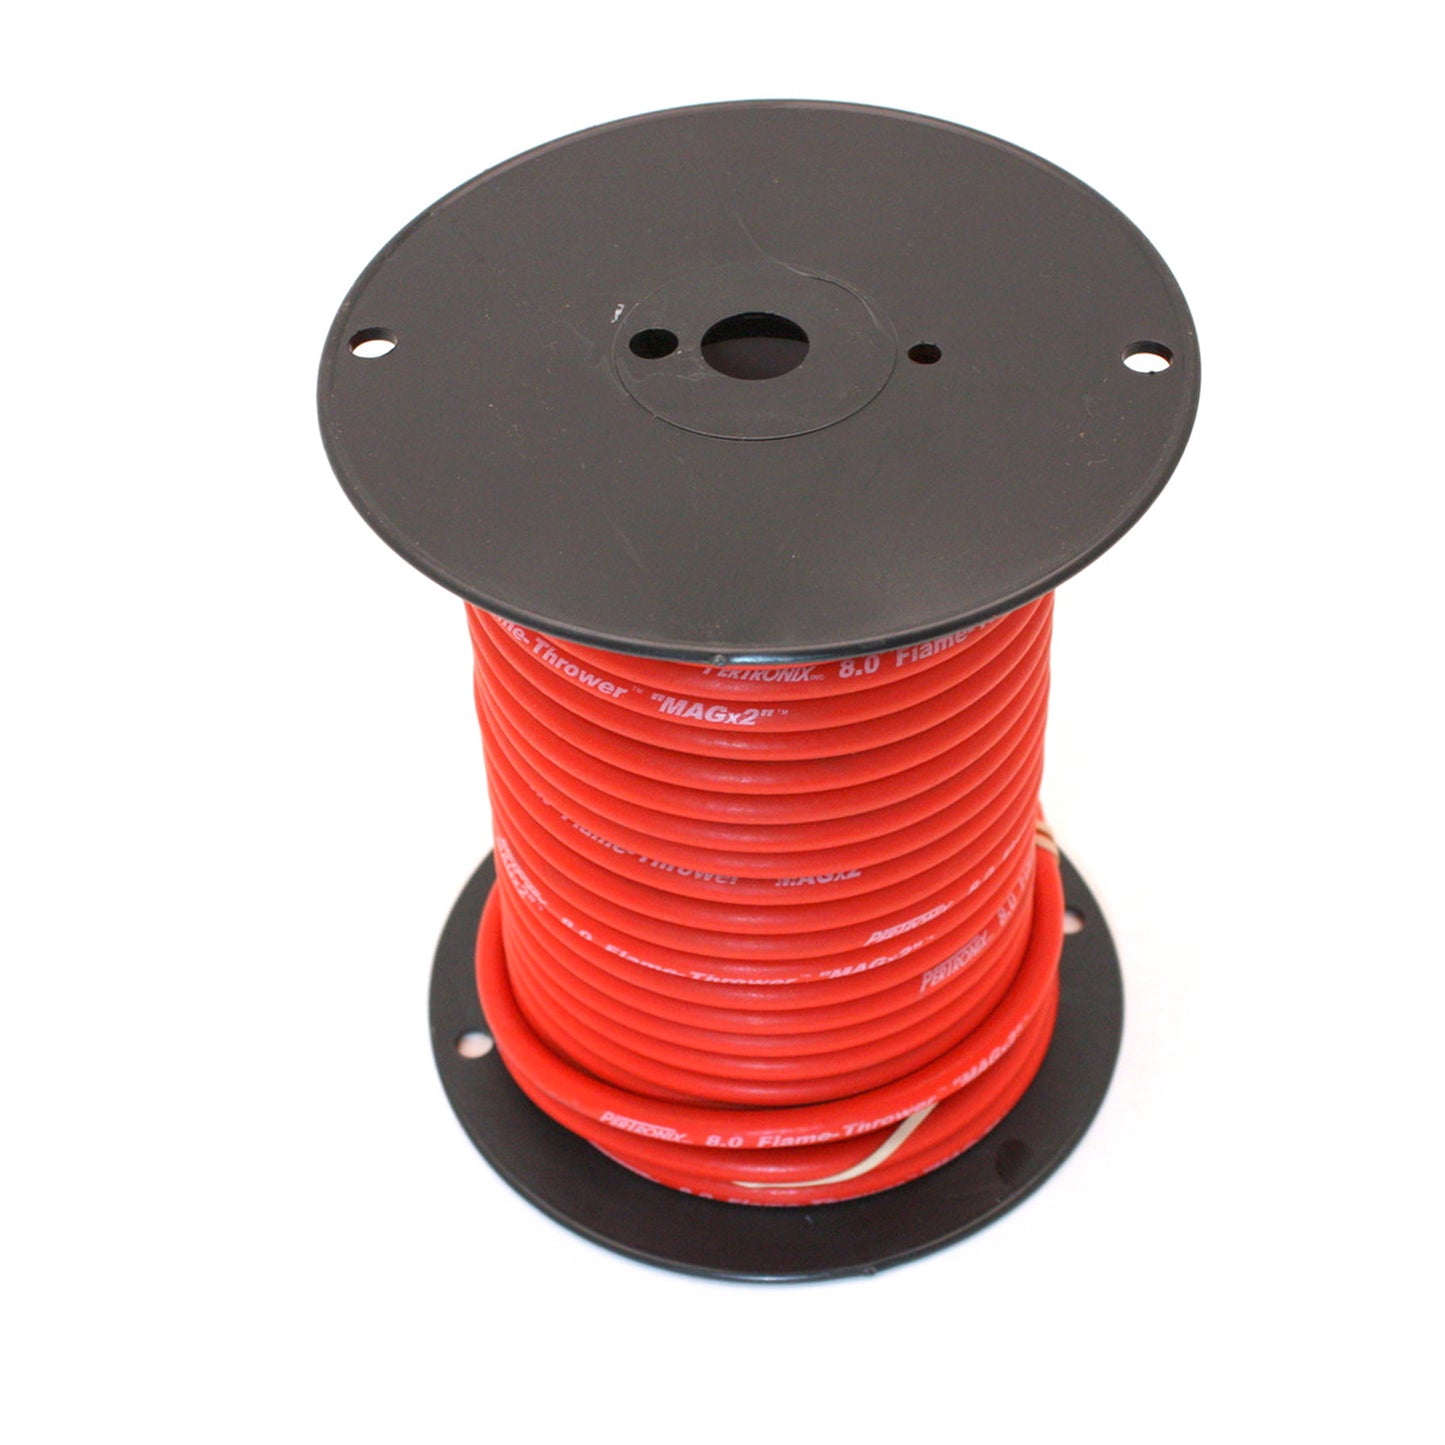 PerTronix 80S410 Flame-Thrower Spark Plug Wire 8mm Red with White Script 100 Foot Spool